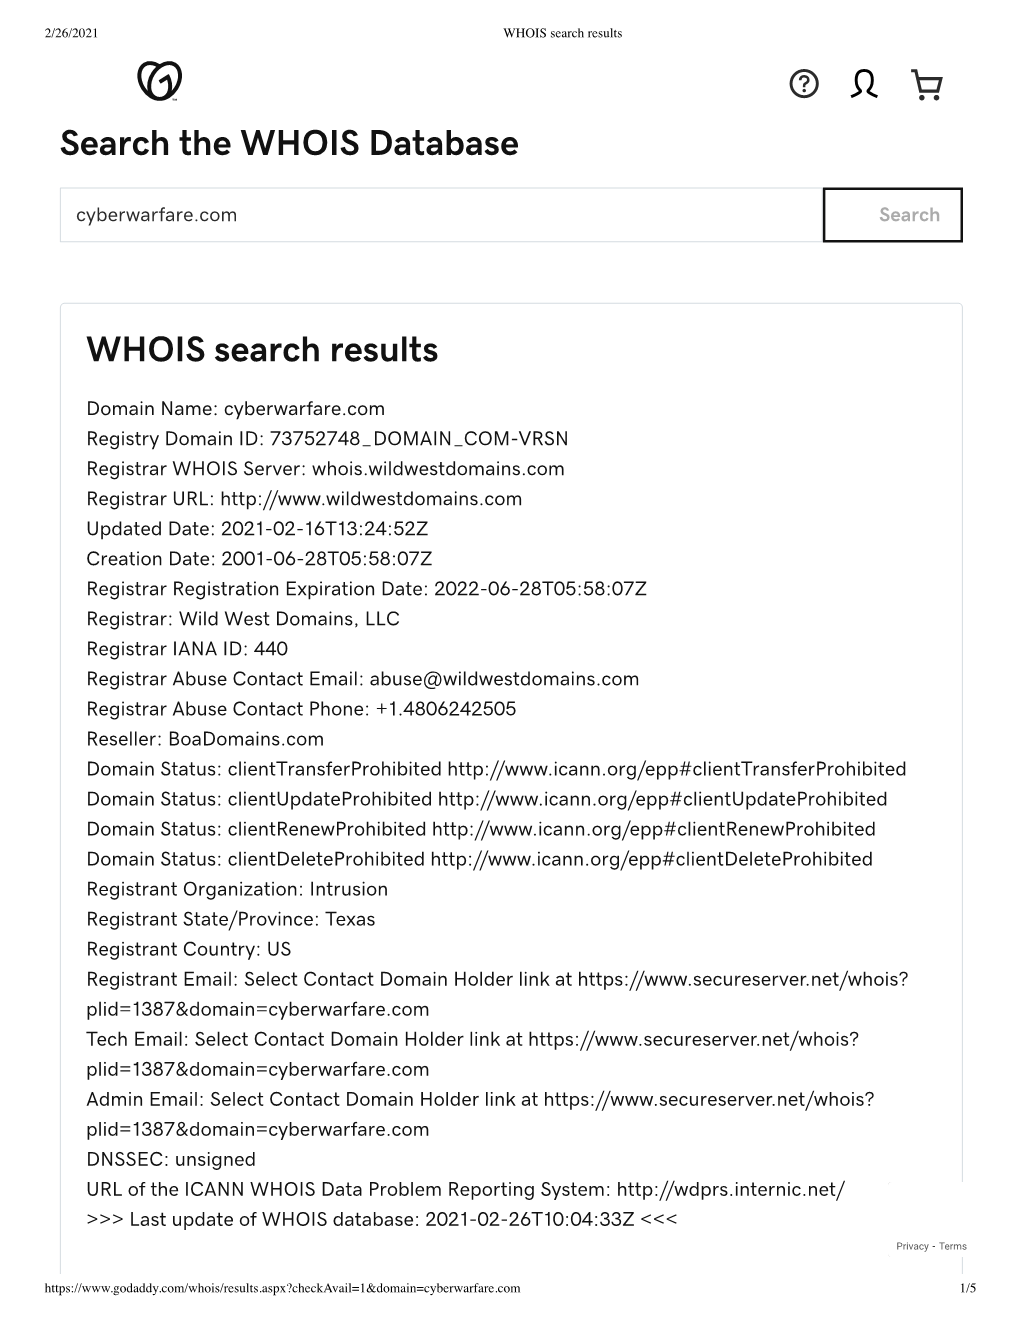 Search the WHOIS Database WHOIS Search Results